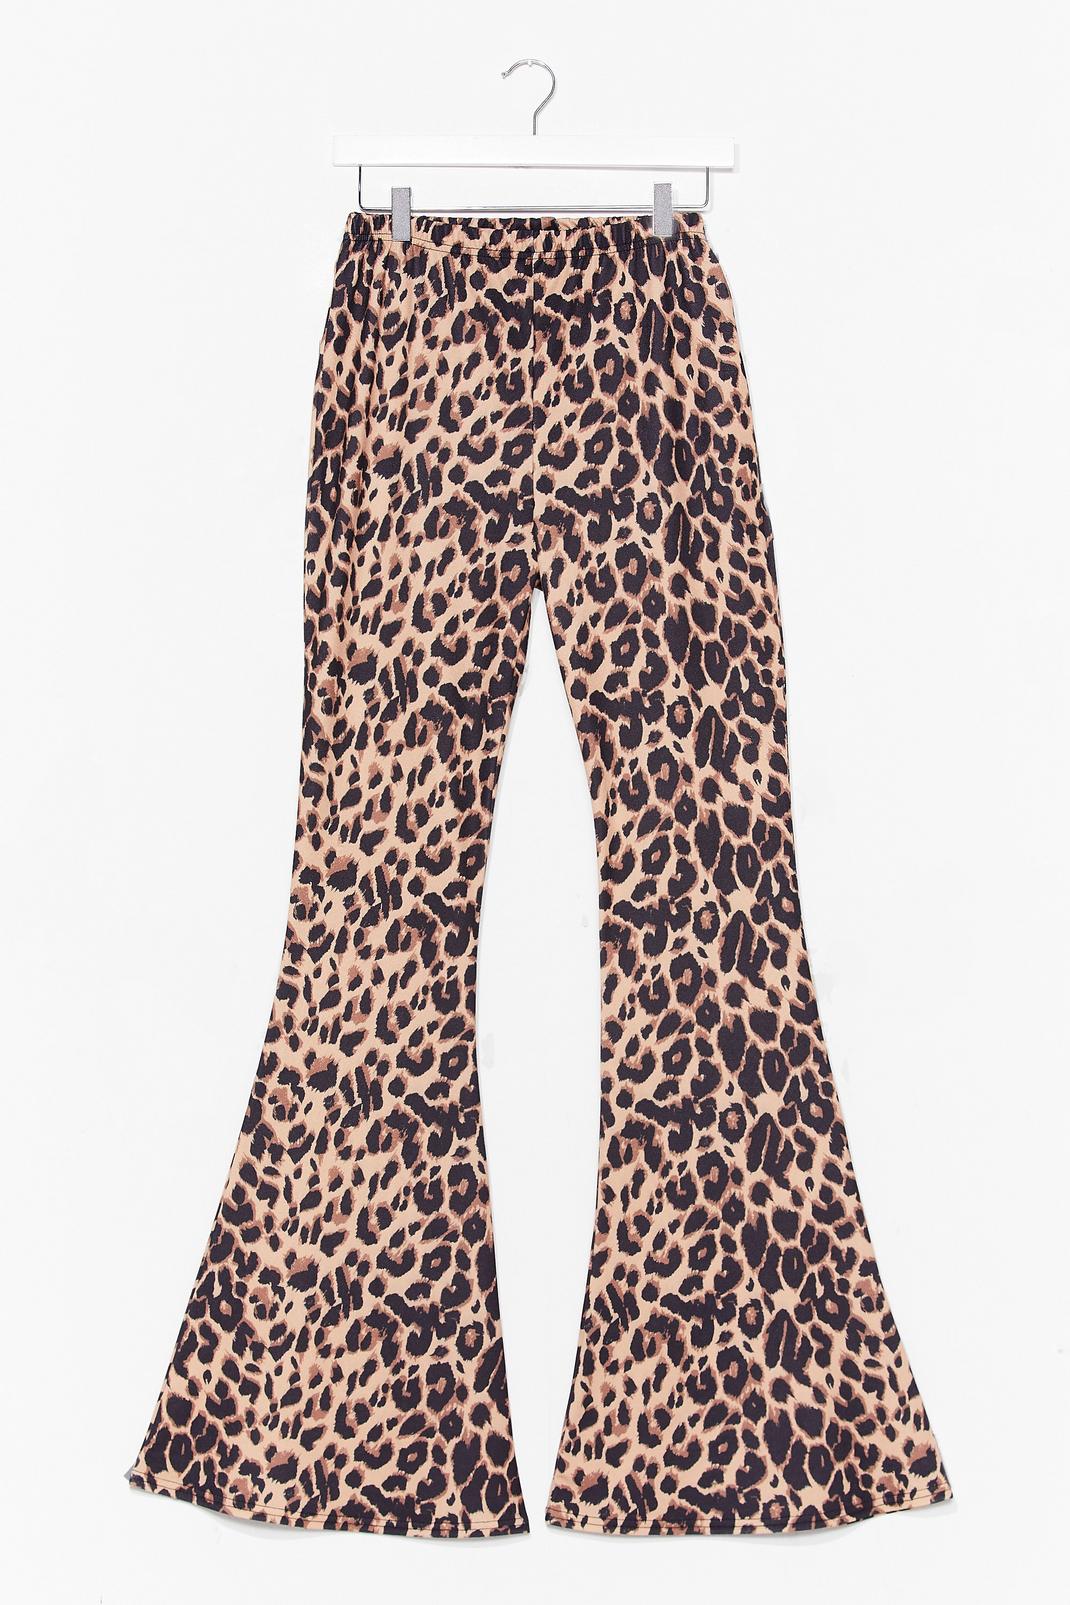 Wild Thoughts Leopard Flare Pants image number 1